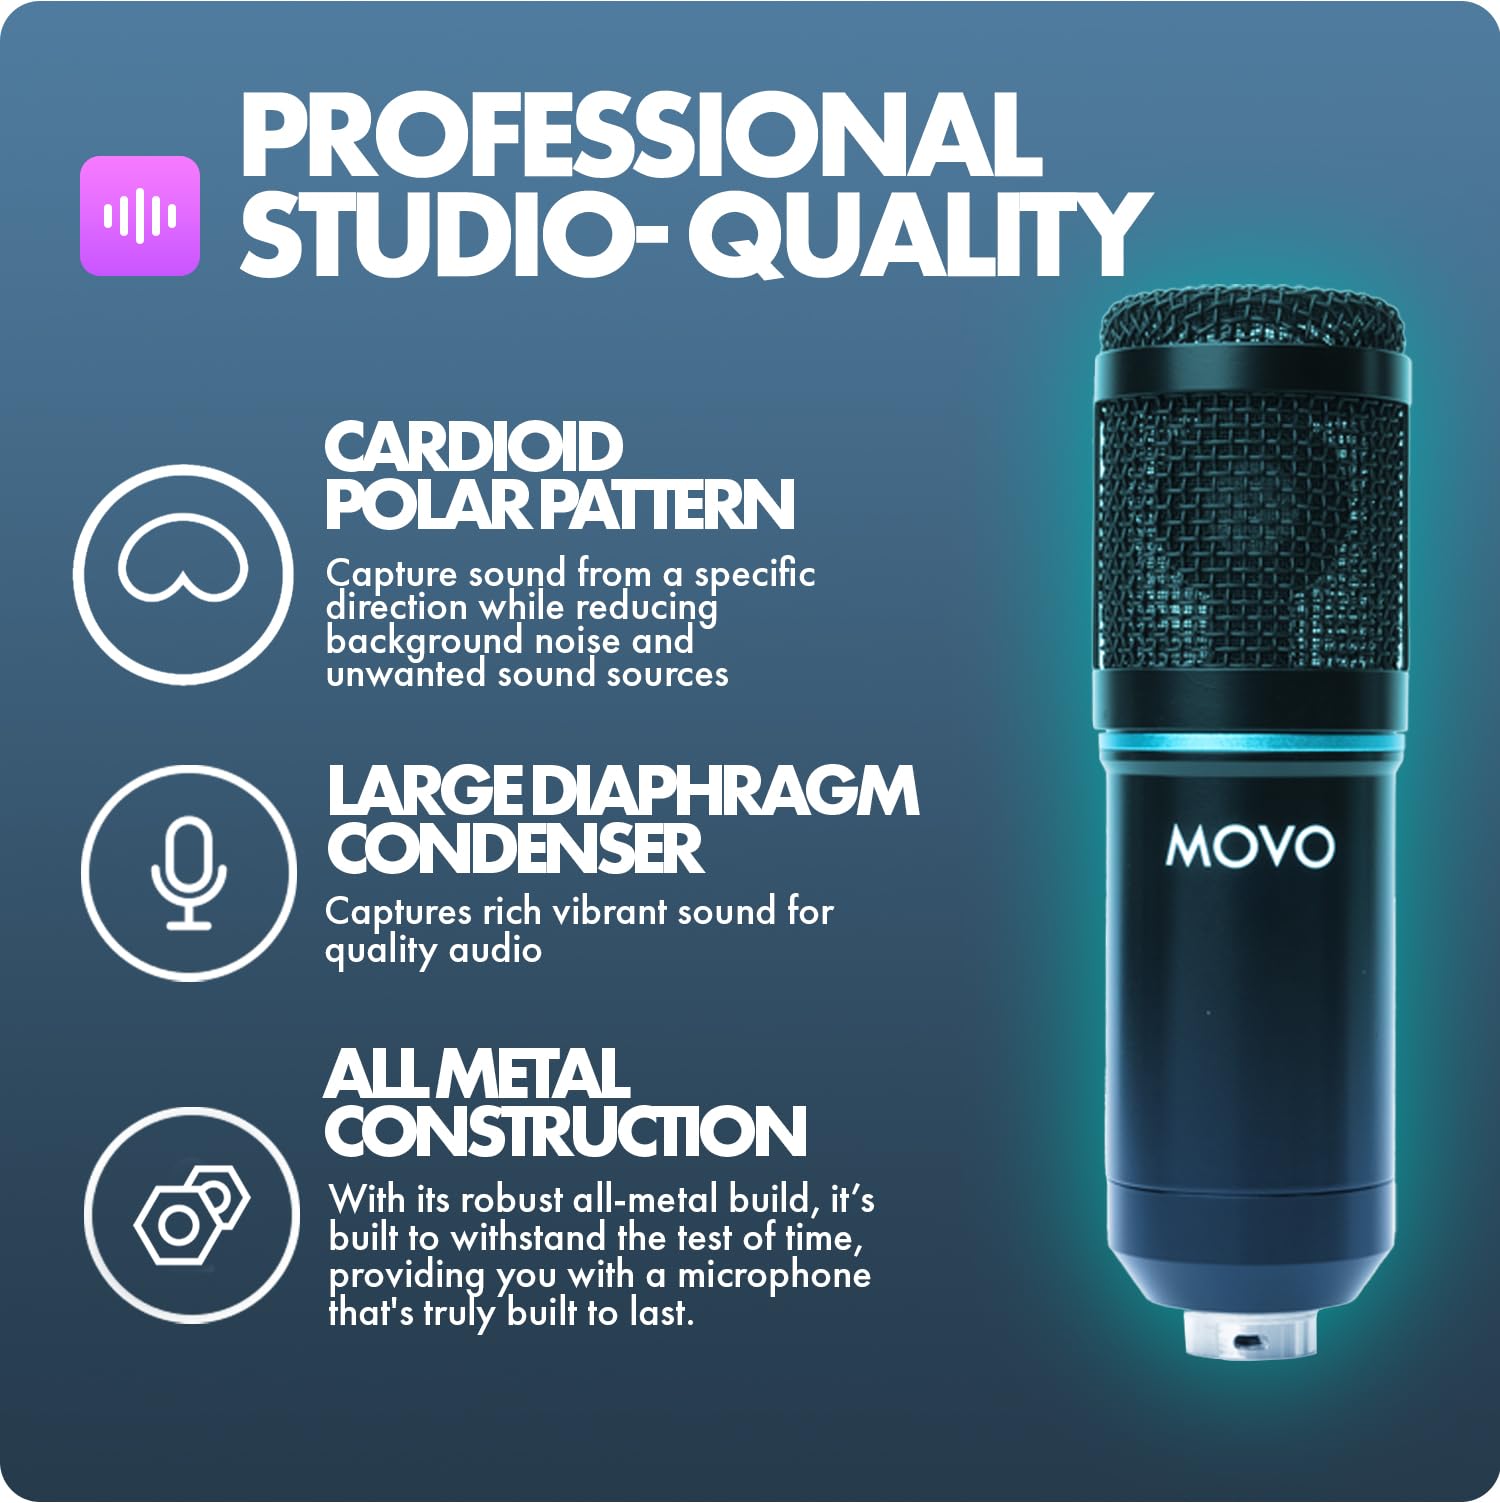 Movo PodPak2A 2-Pack Universal Cardioid Condenser Microphone Kit with Articulating Scissor Arm Mic Stand, Shock Mount, and Gooseneck Pop Filter - Podcast Equipment Set for YouTube, Podcast, Streaming  - Like New